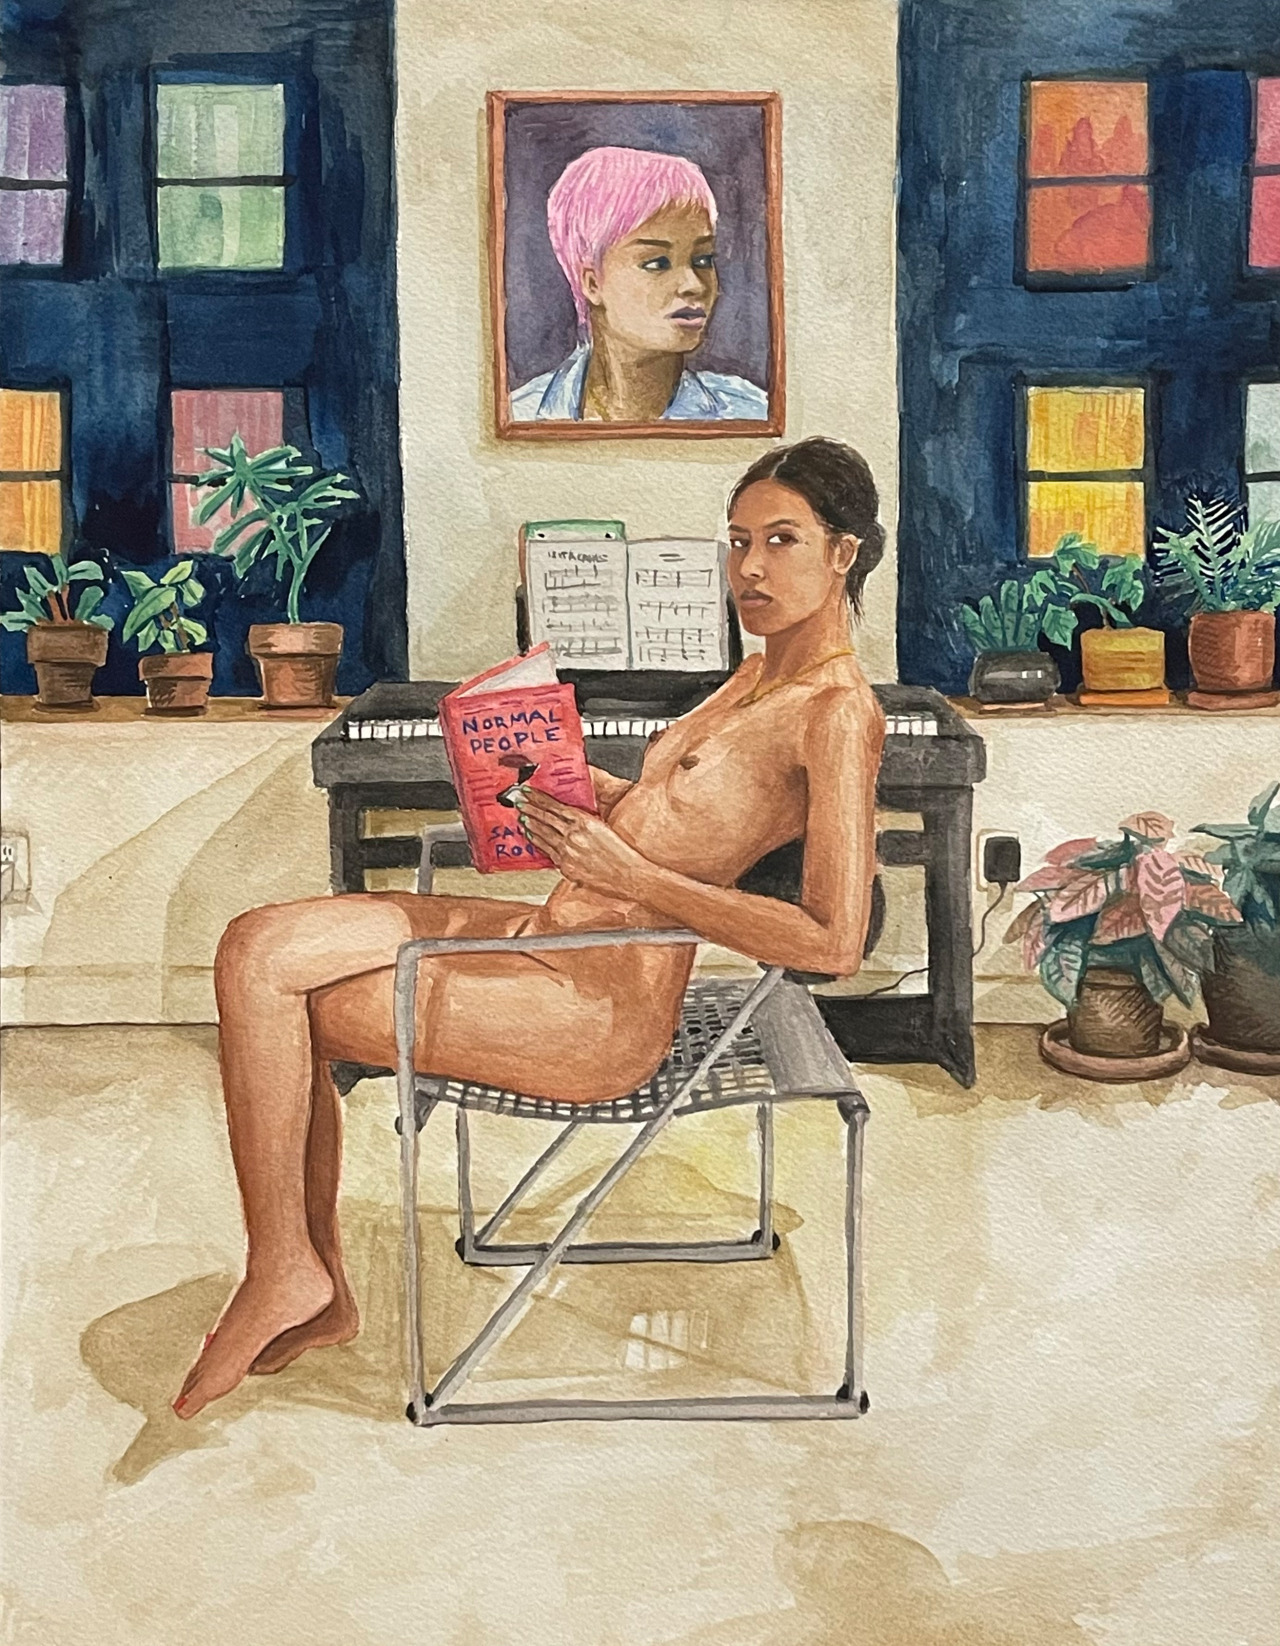 Tawny At Home Reading Normal People. 2022. Watercolor on archival paper.